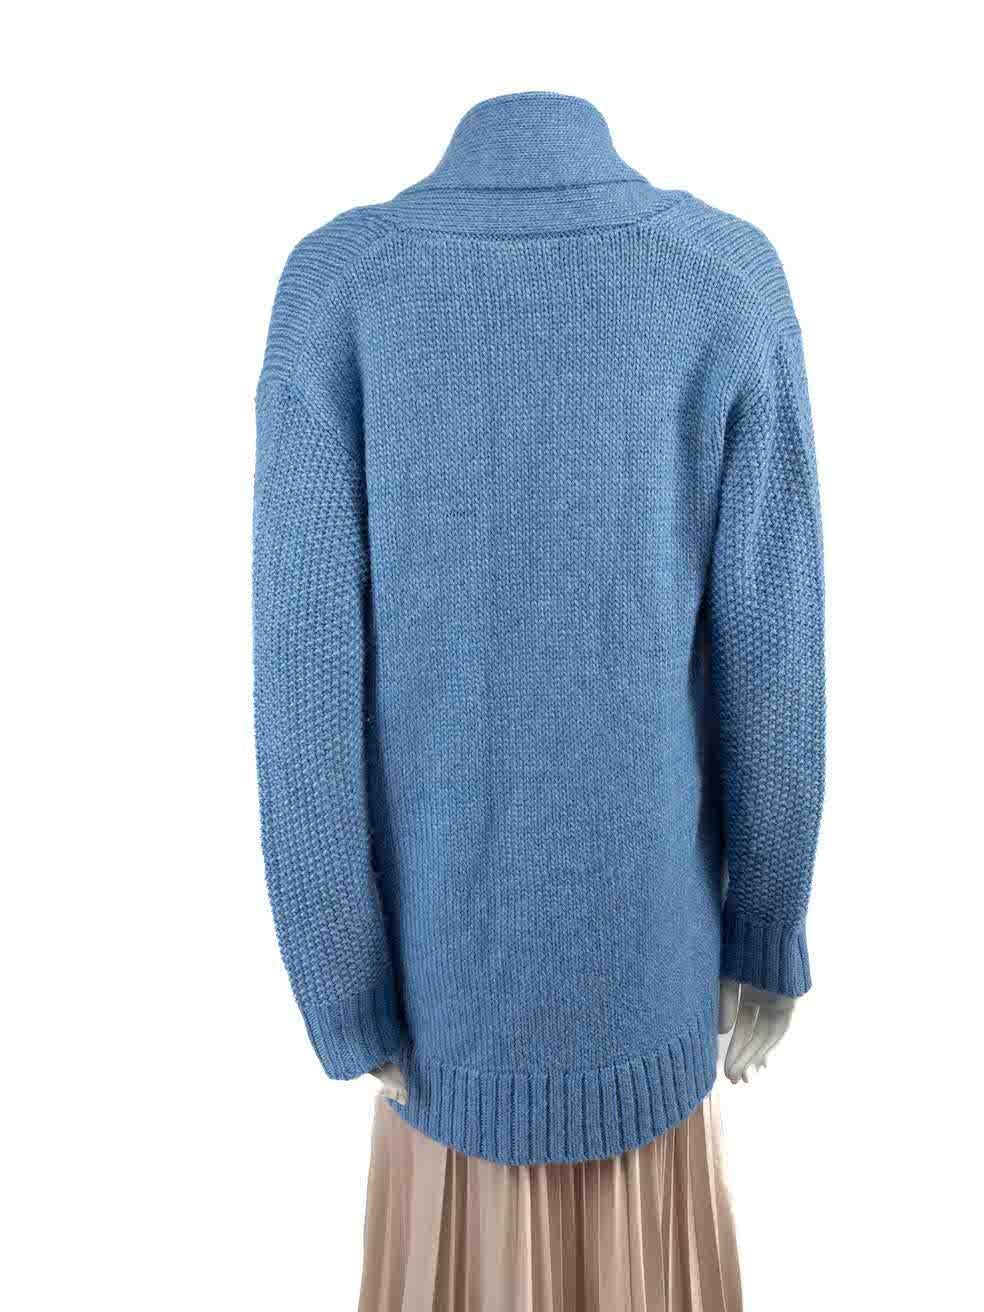 Hatch Blue Merino Wool Knit Collared Cardigan Size S In Good Condition For Sale In London, GB